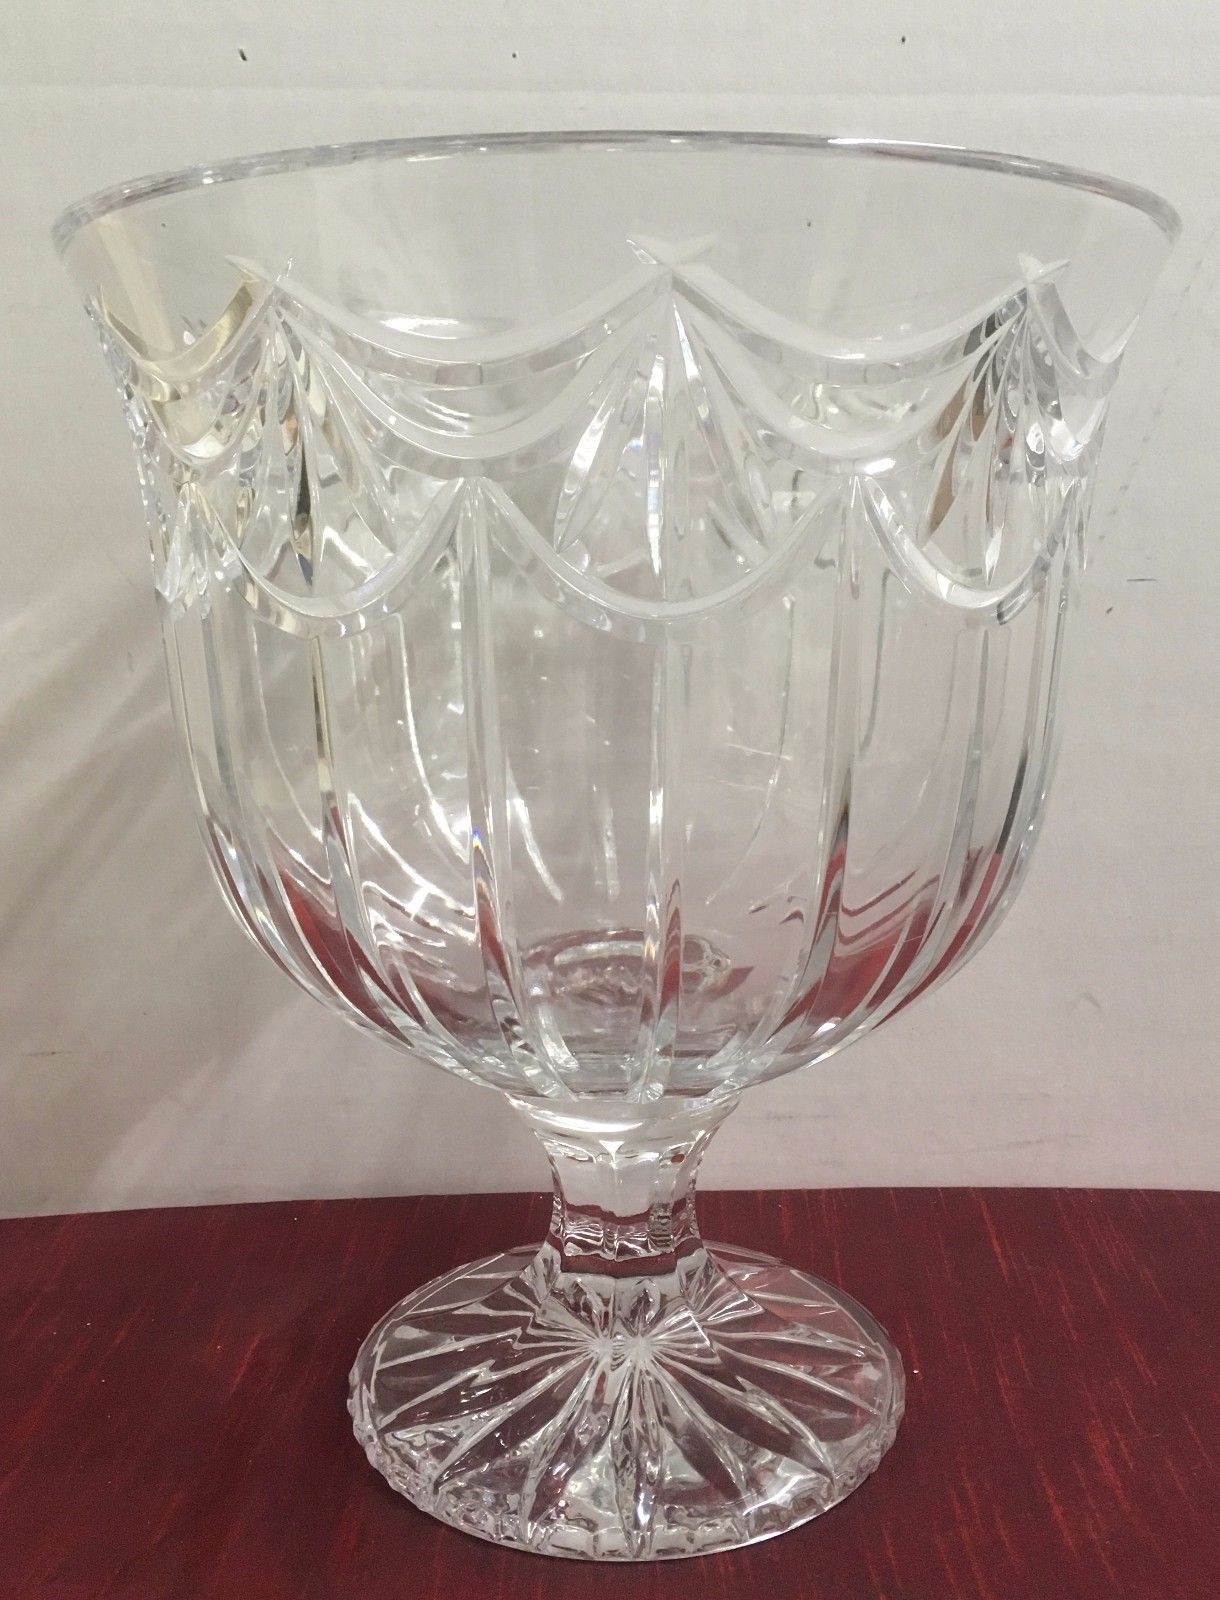 New Shannon Crystal Pedestal Footed Serving Bowl